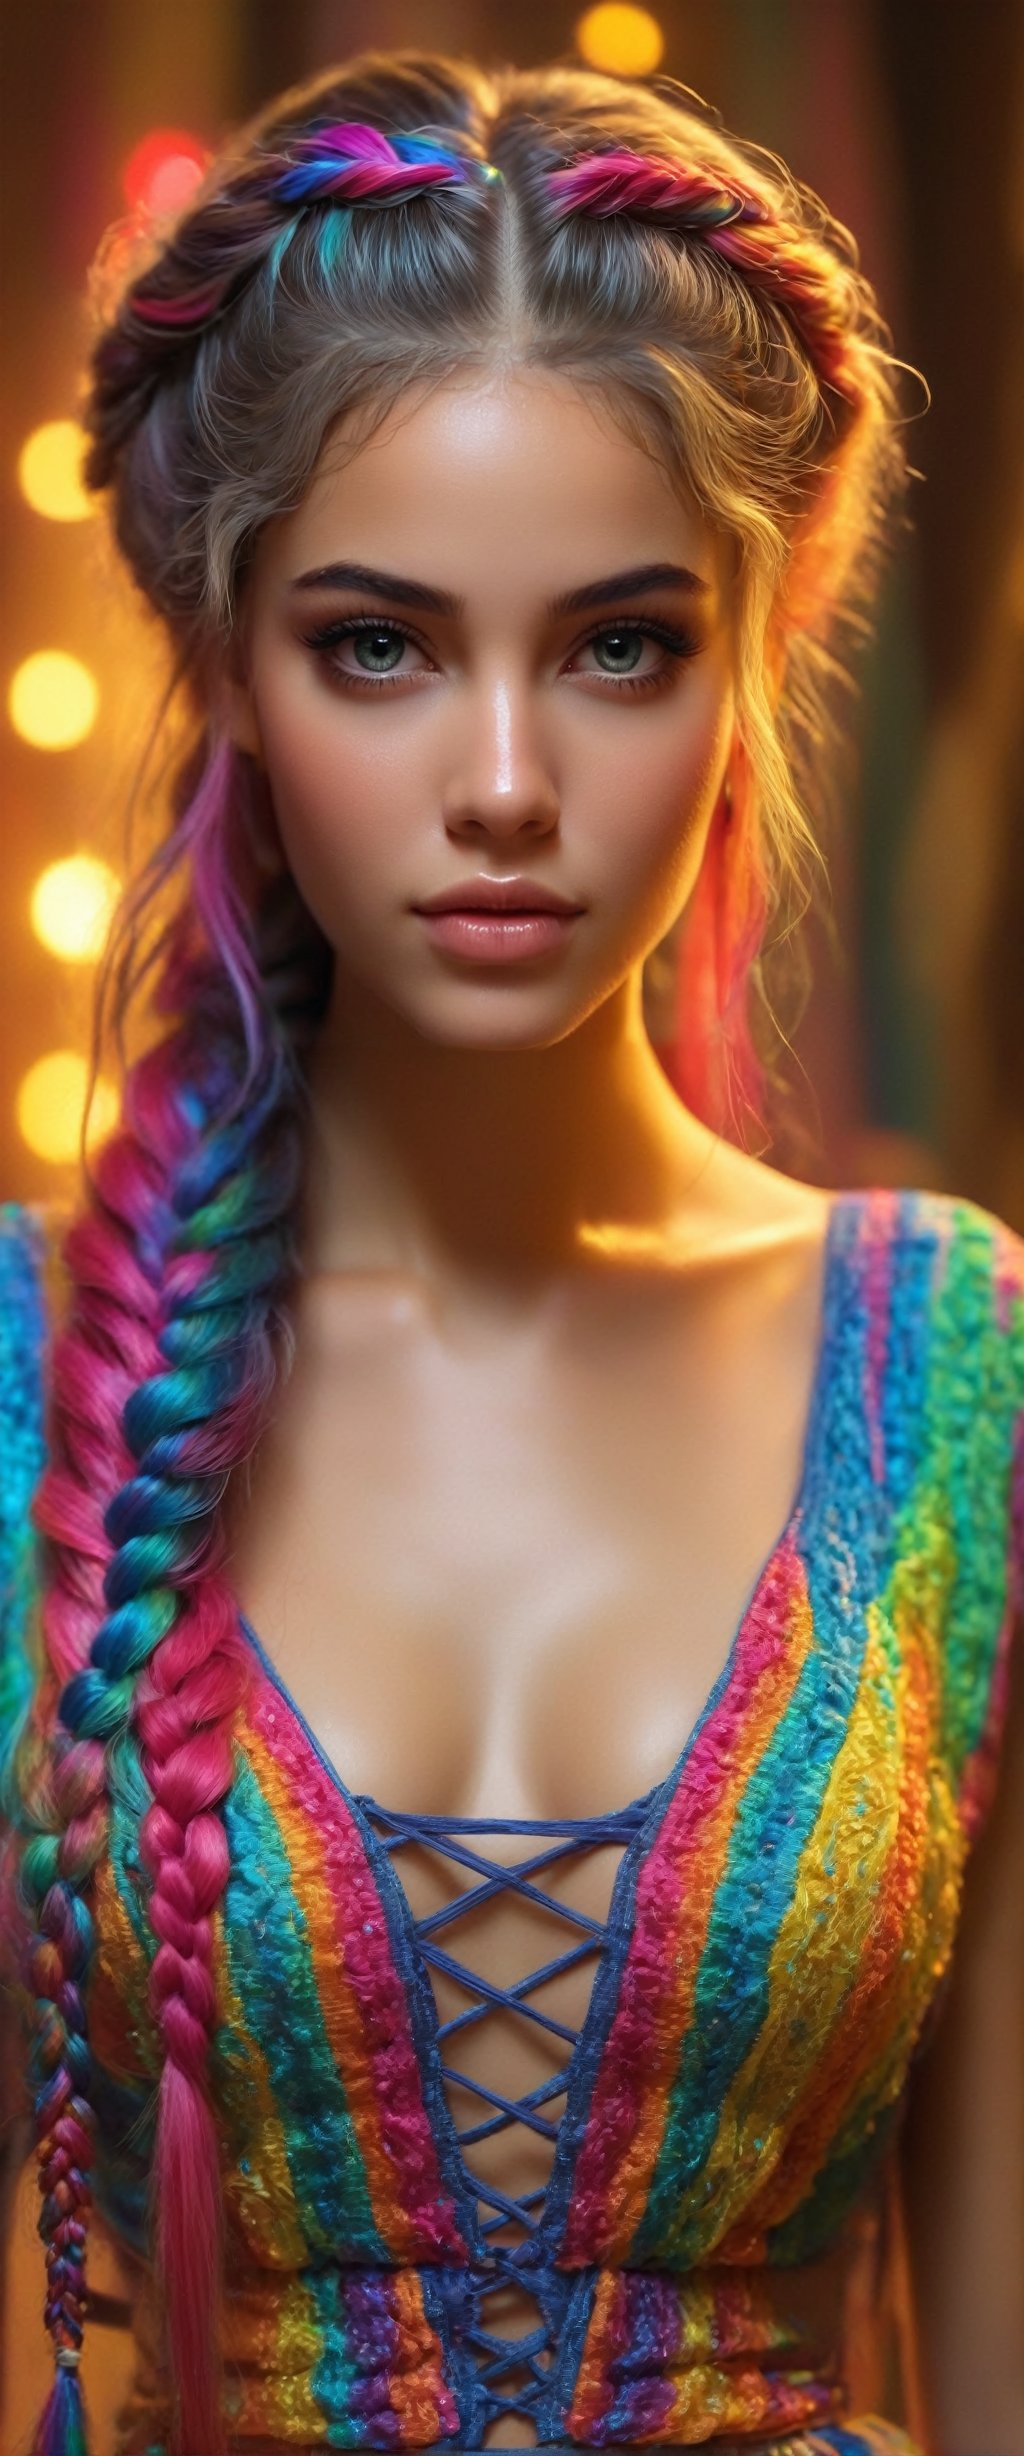 Kitsch maximalism fashion style,1Girl,Beautiful Brazilian girl, long incredibly intricately braided hair, colorful and overdecorated dress,Rainbow haired girl,
Embroidery using threads that emit light with LEDs, ct-nijireal